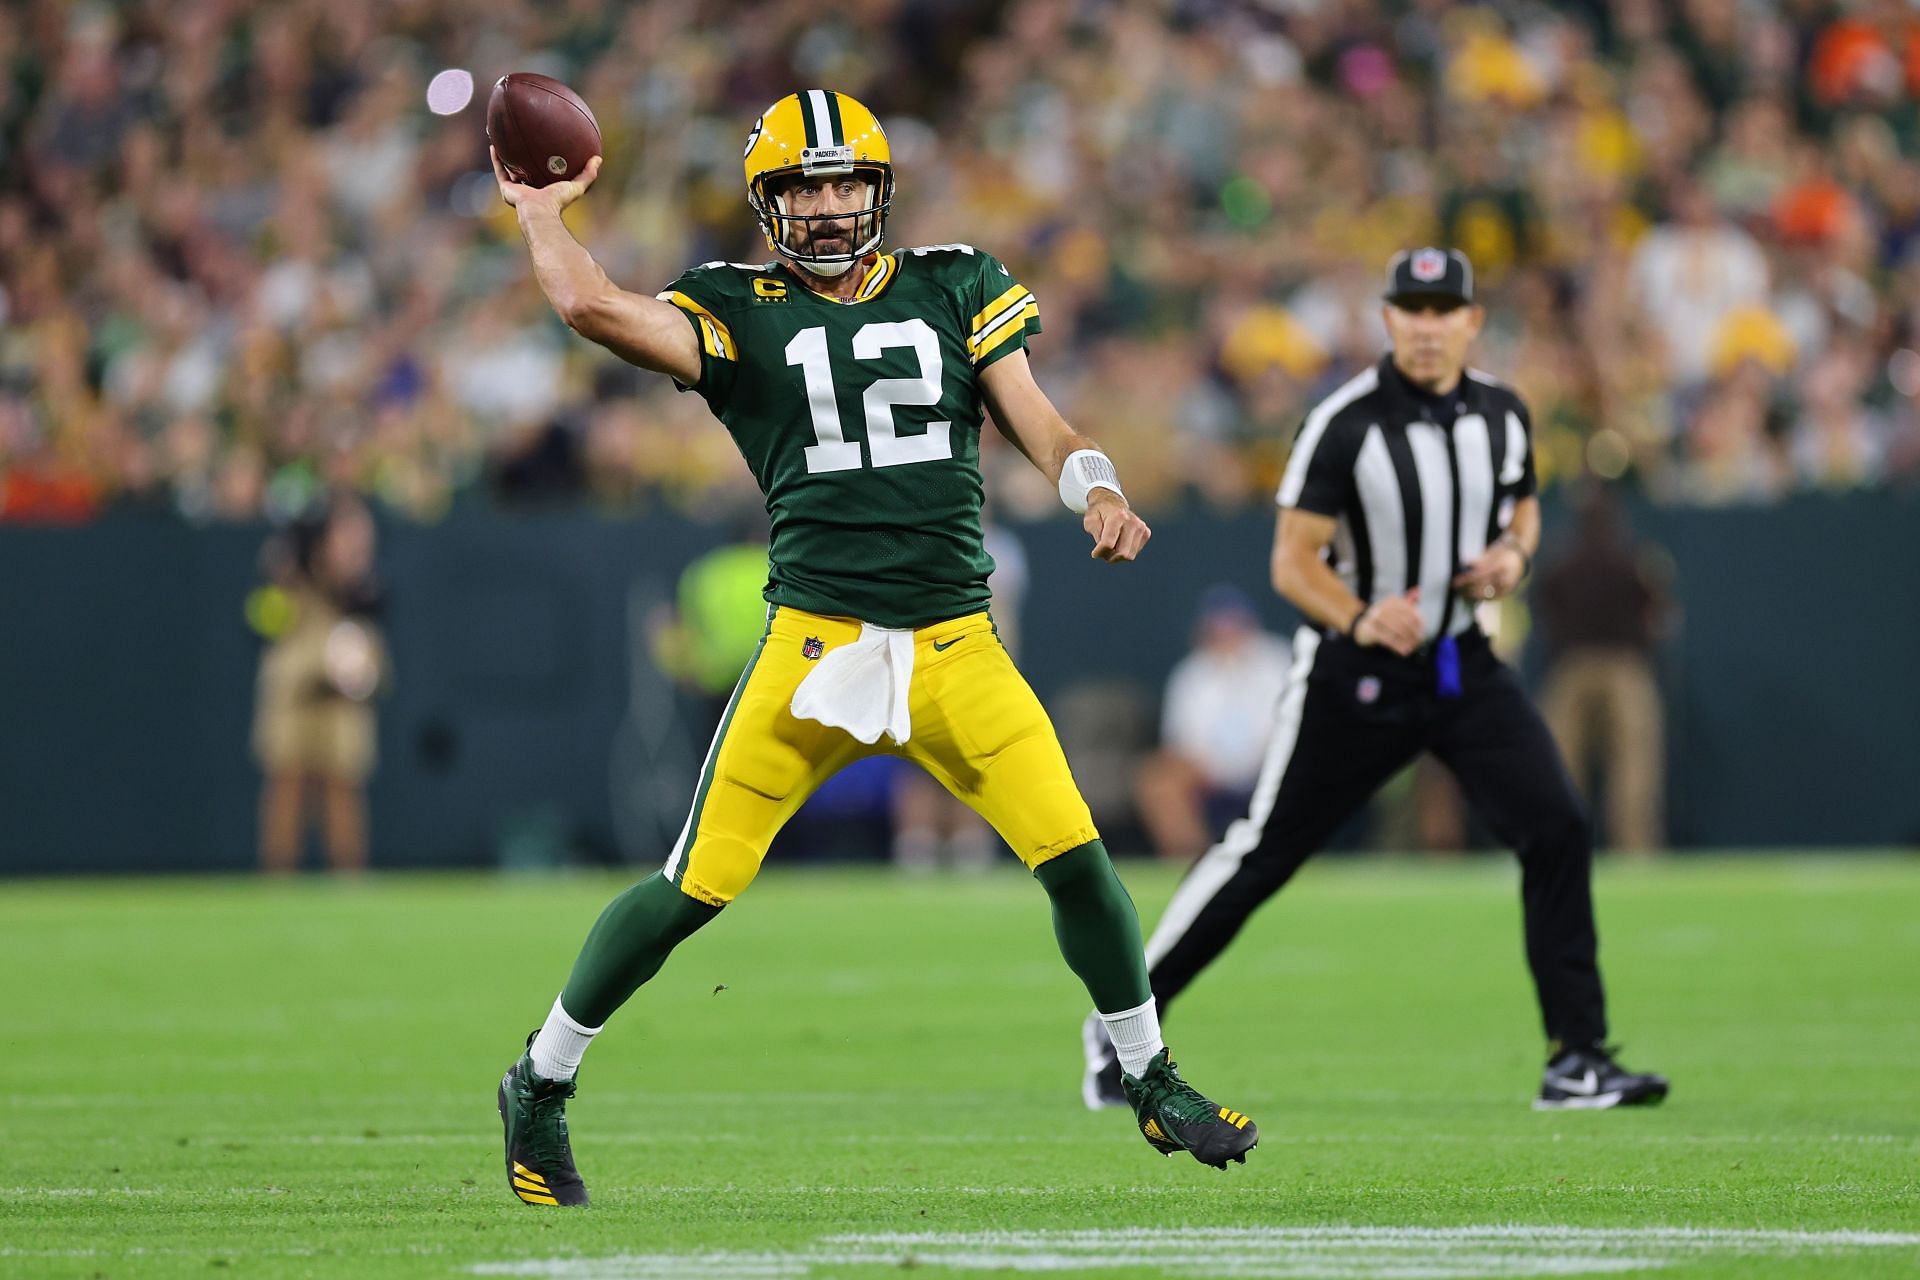 Tom Brady v Aaron Rodgers is still a marquee match-up. But for how much  longer?, NFL